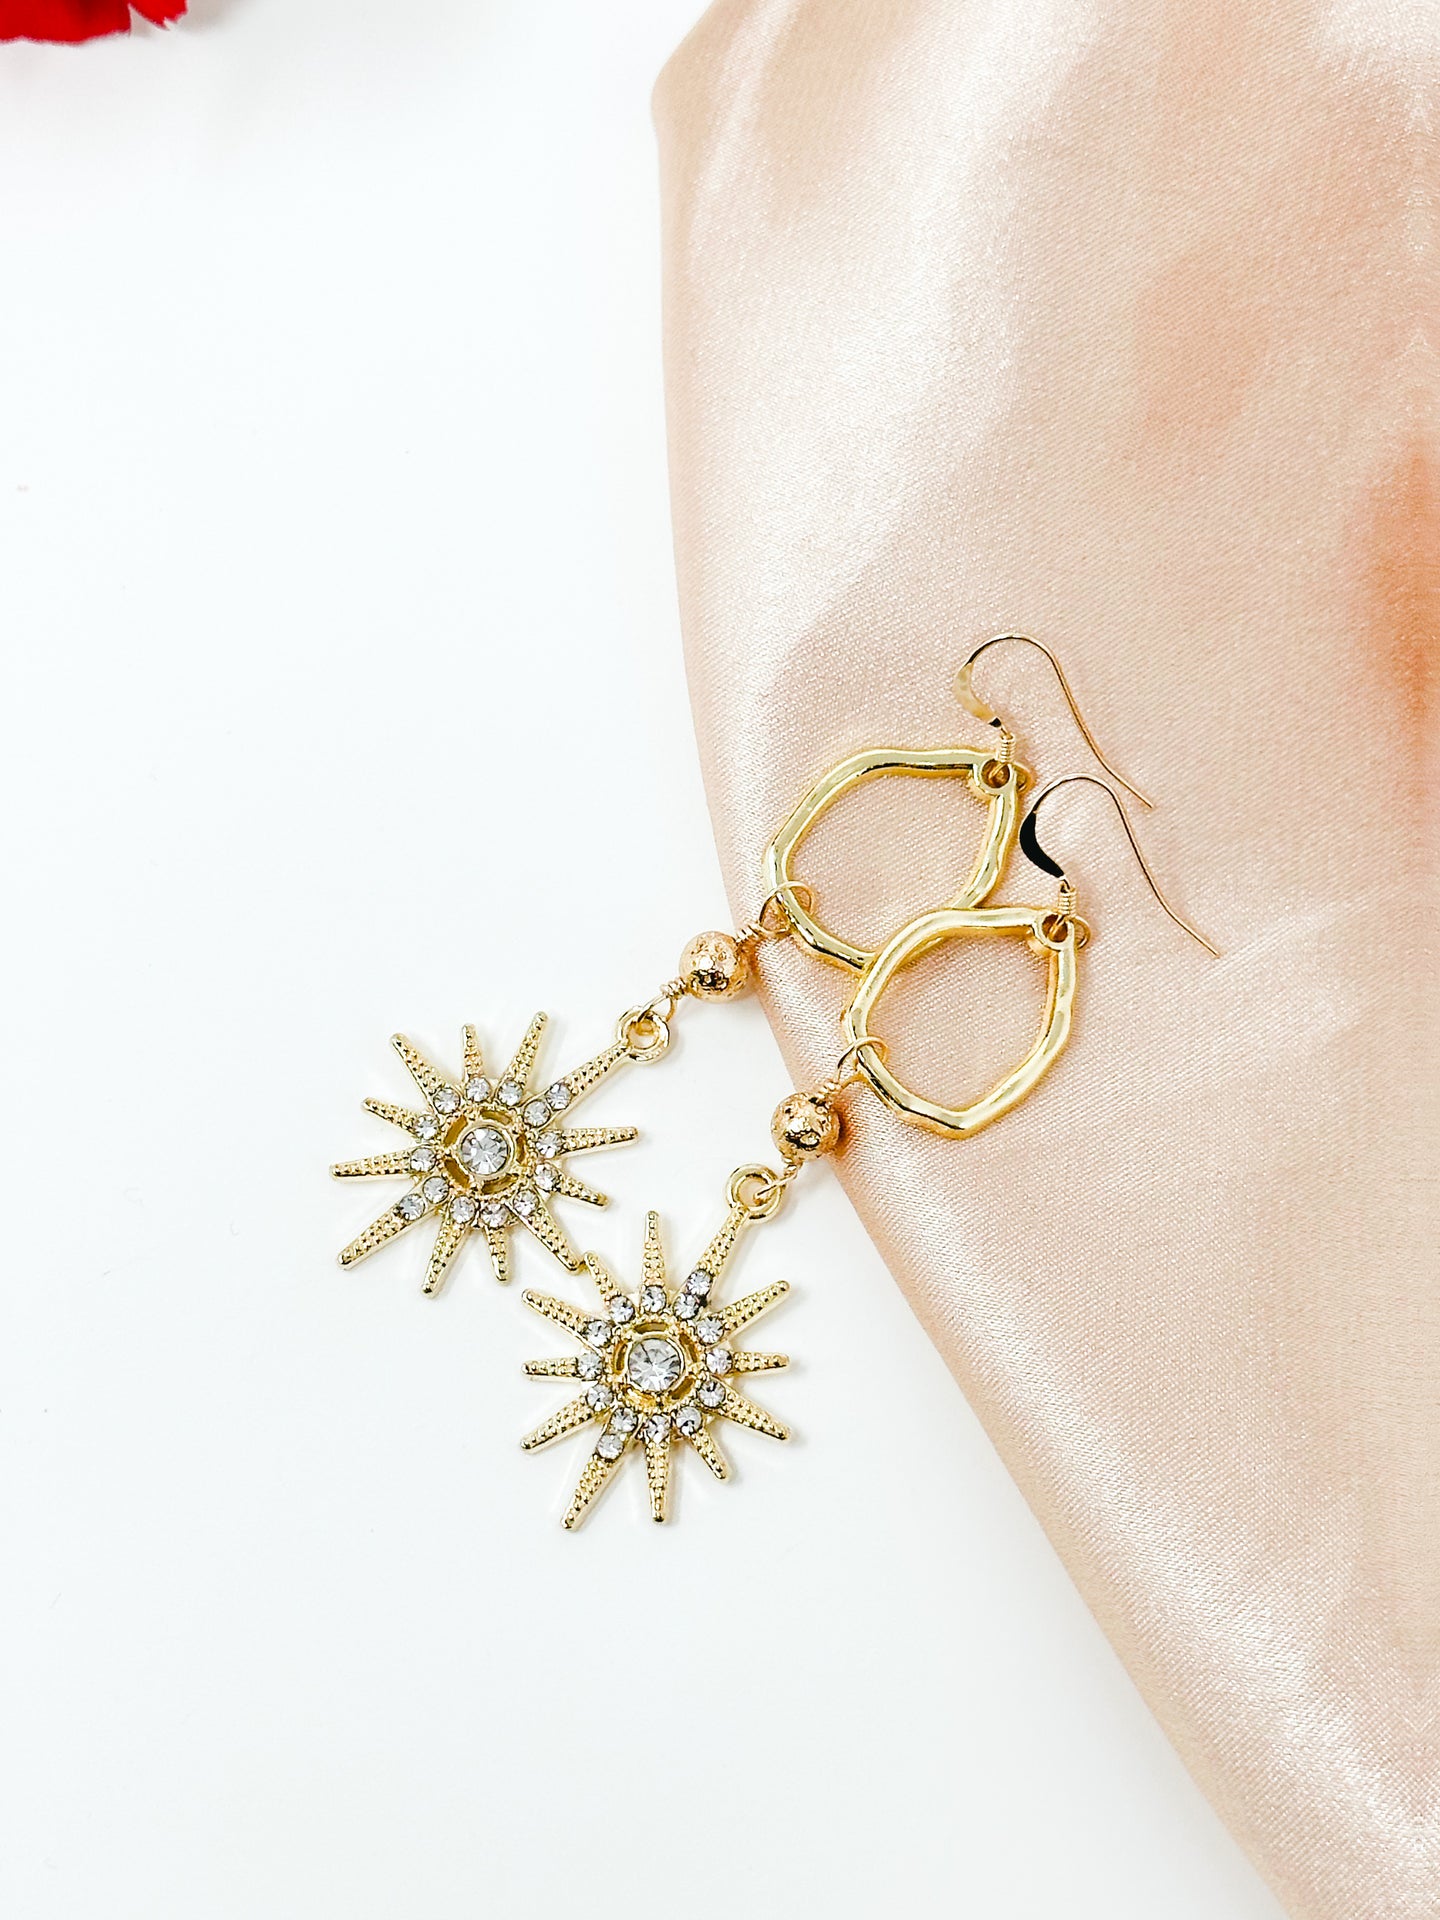 Gemstone Starburst charms with gold plated lava rock and hoop earrings-14k hooks.